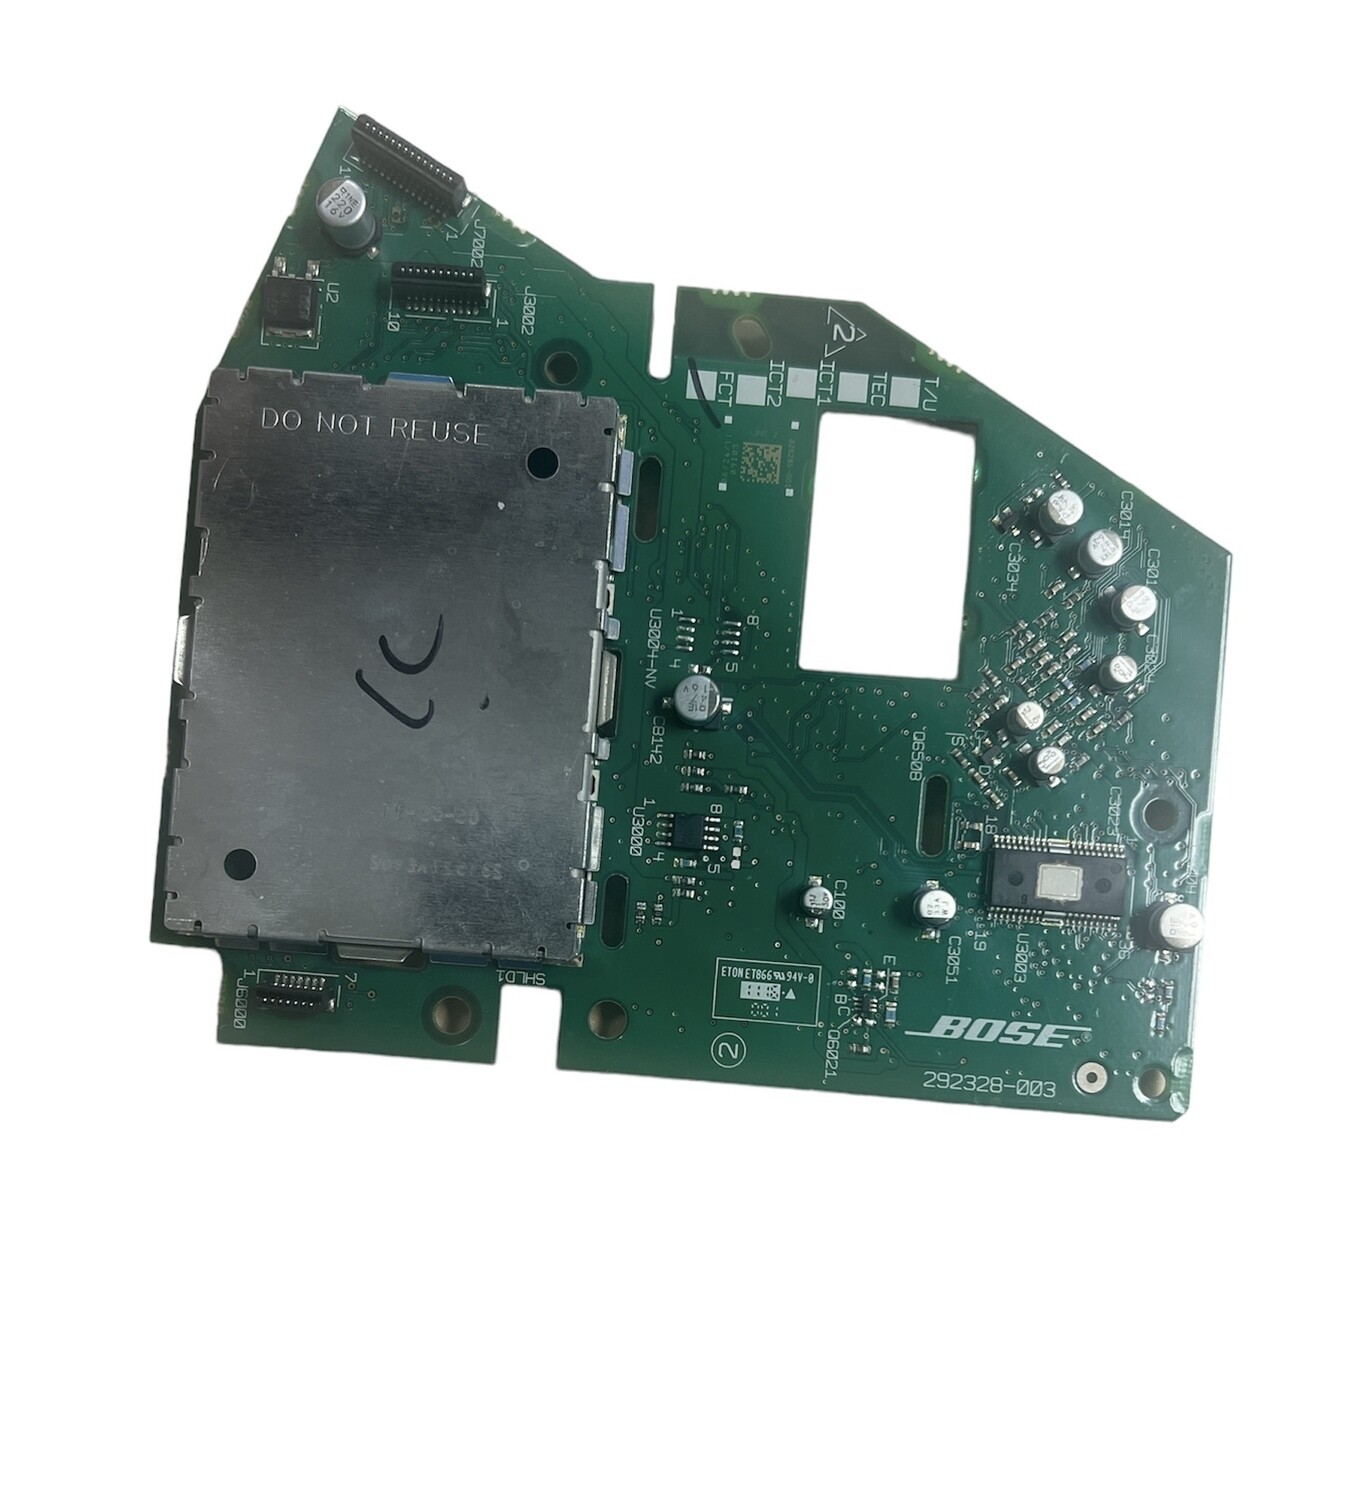 Replacement CD Processor PCB for Bose Wave 3 Multi CD Changer - Wave Music System Awrcc1 Awrcc2 280439-001